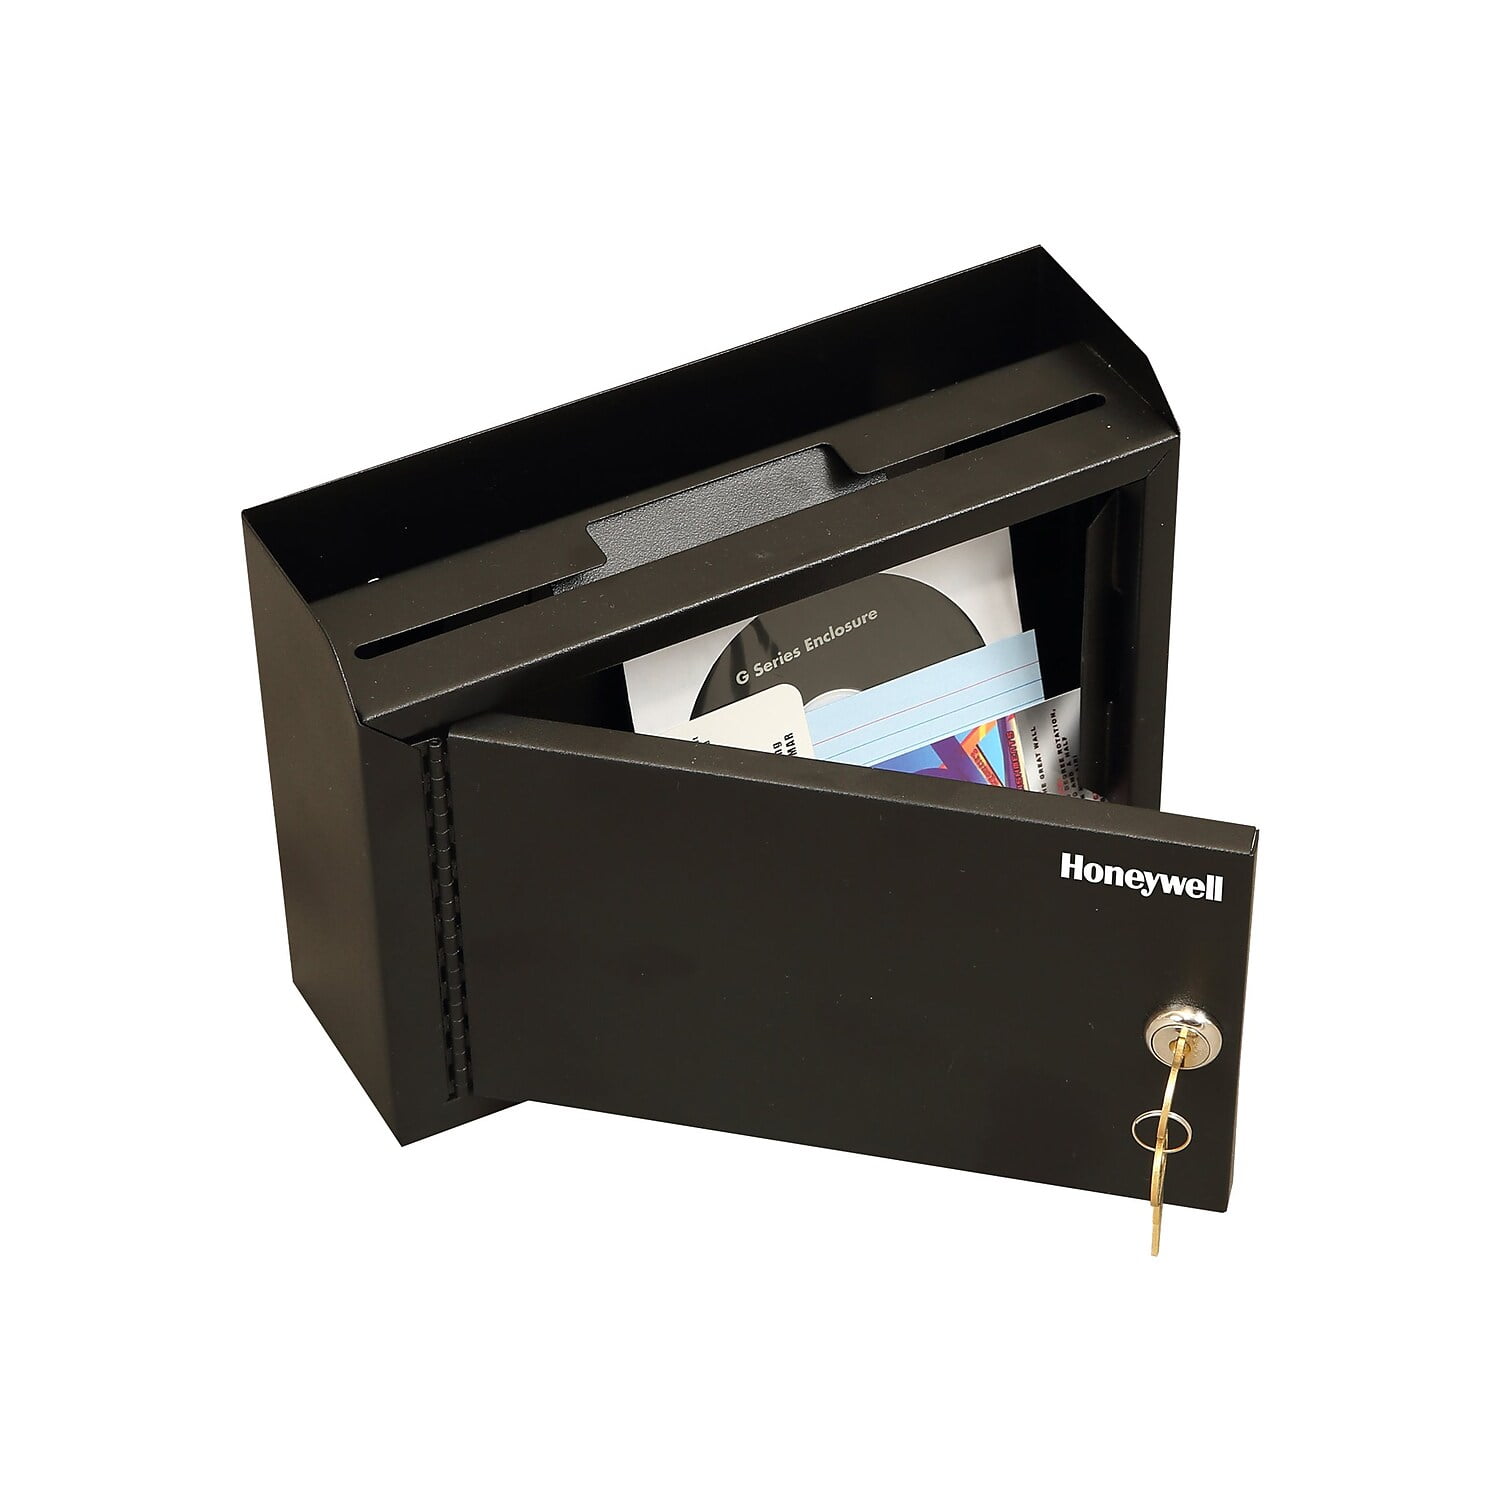 12X12X6 Hat Box - Hb-12126 - Firefly Solutions